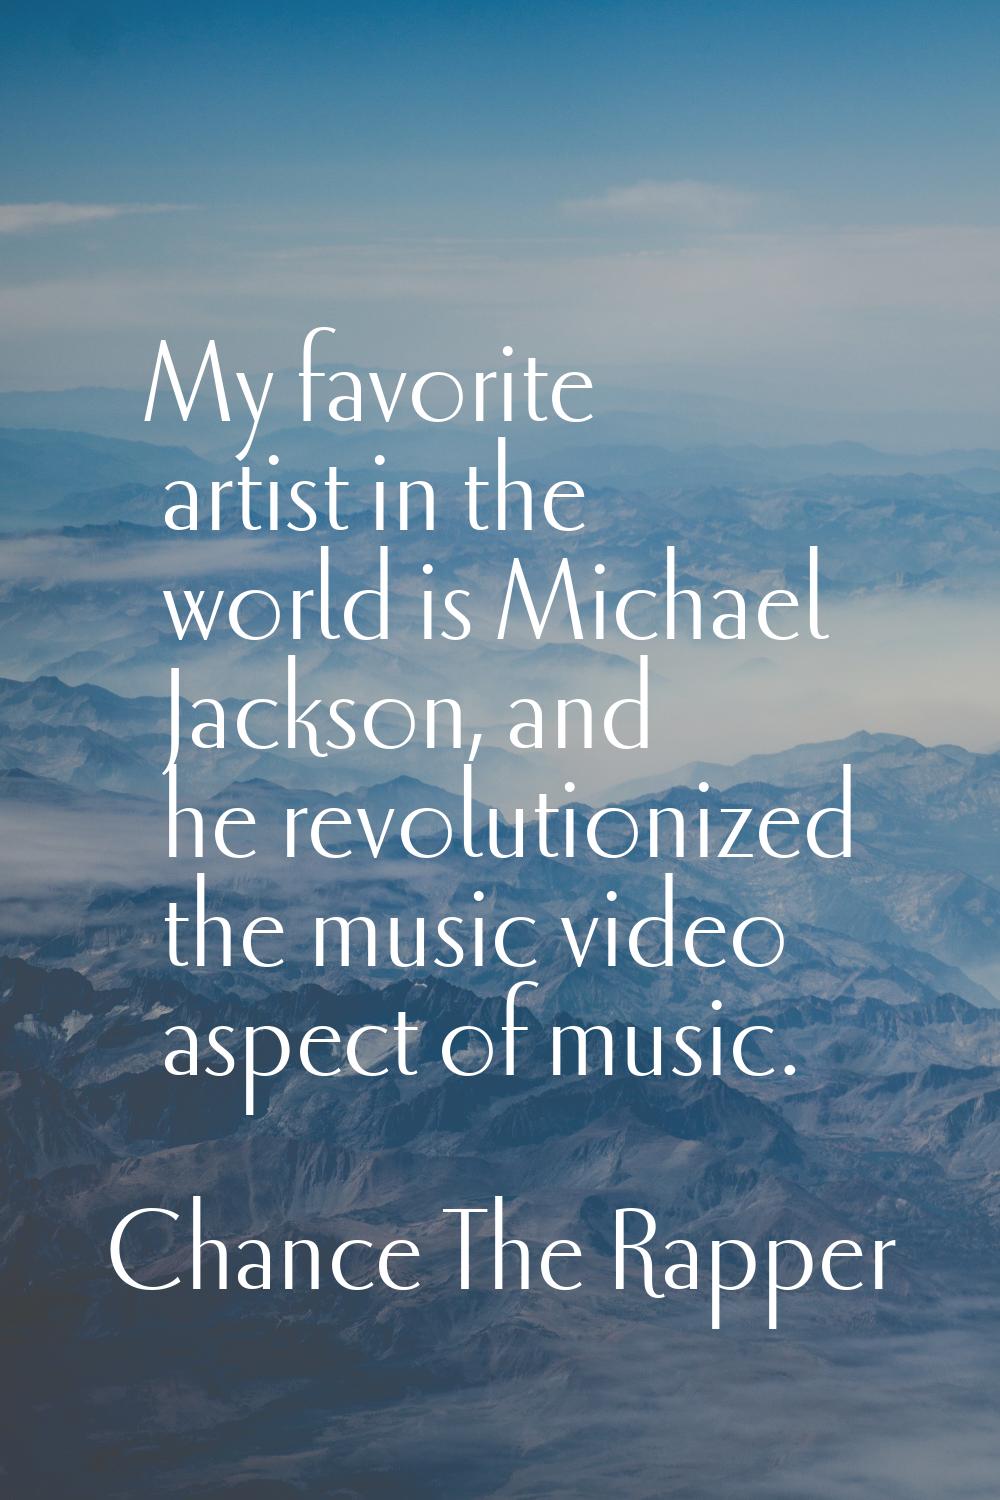 My favorite artist in the world is Michael Jackson, and he revolutionized the music video aspect of